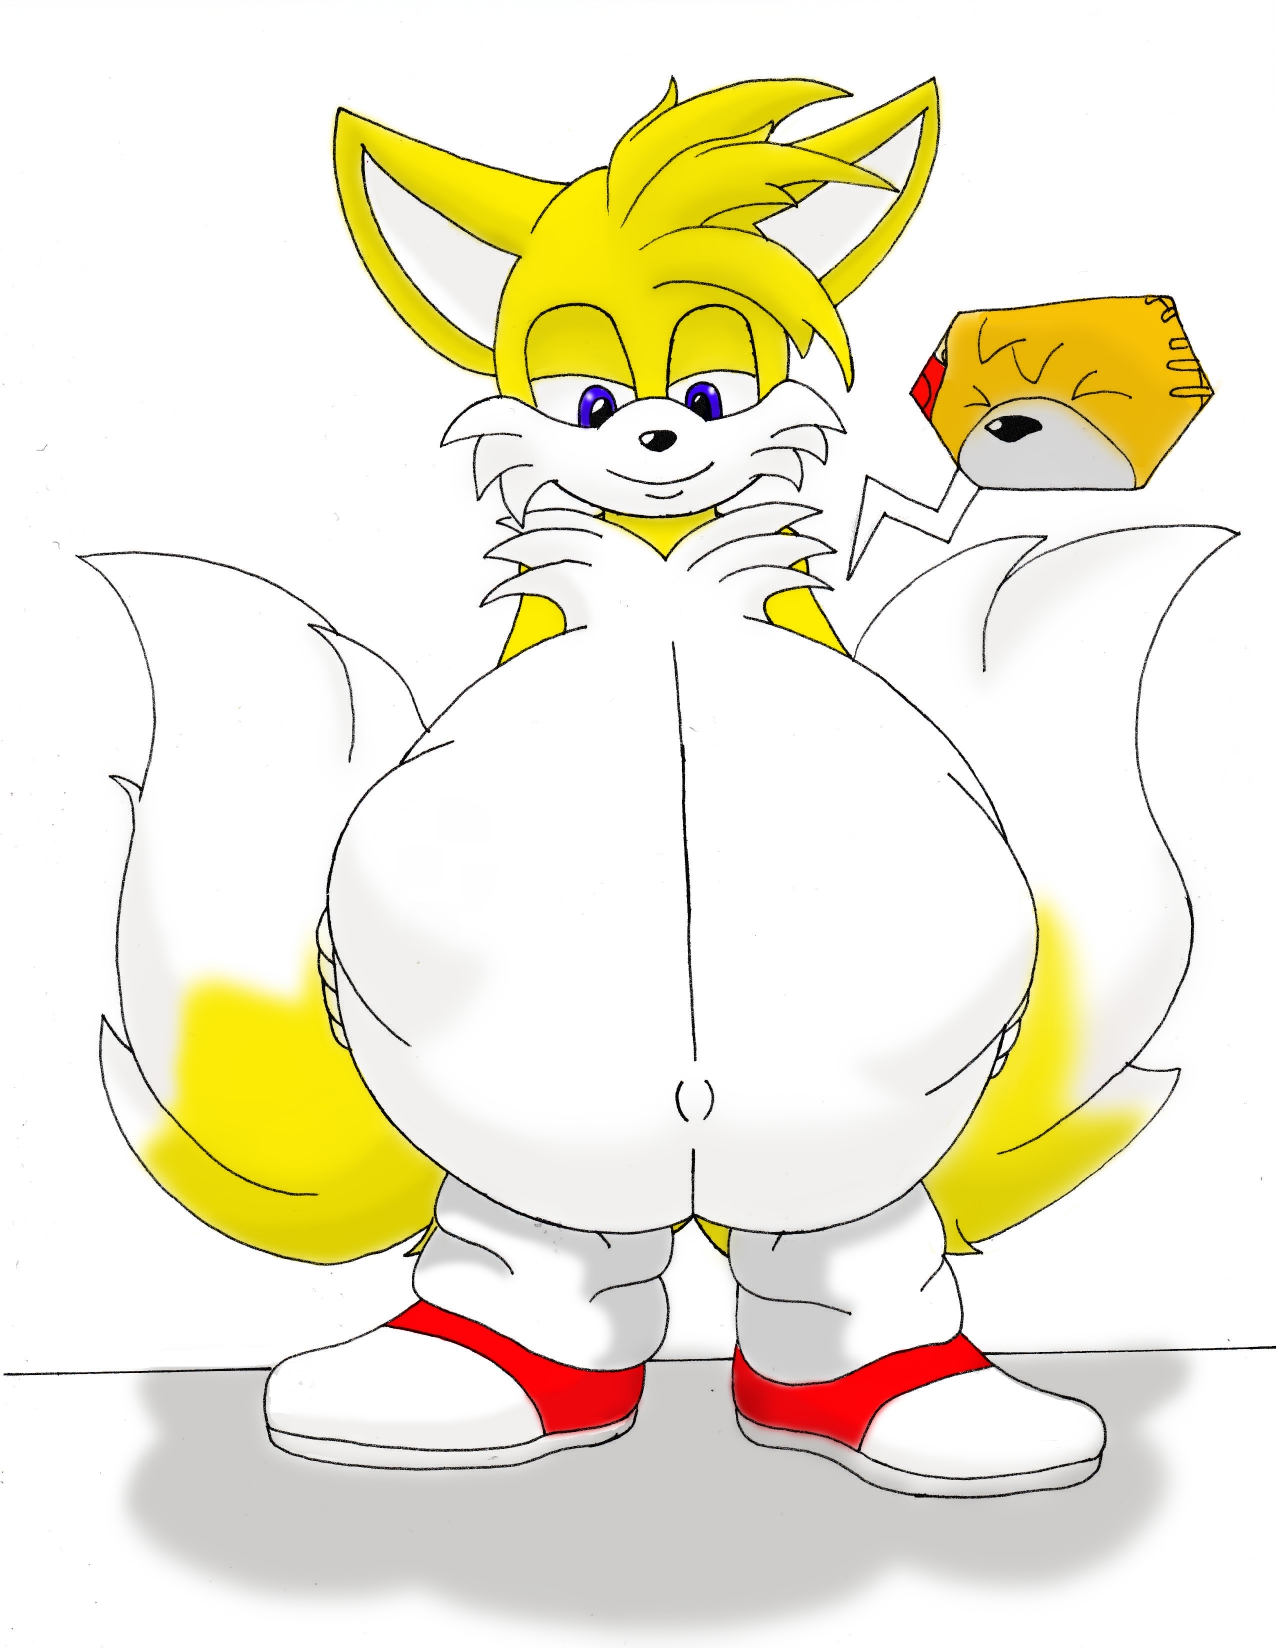 Tails Doll by MeruTheFish on DeviantArt